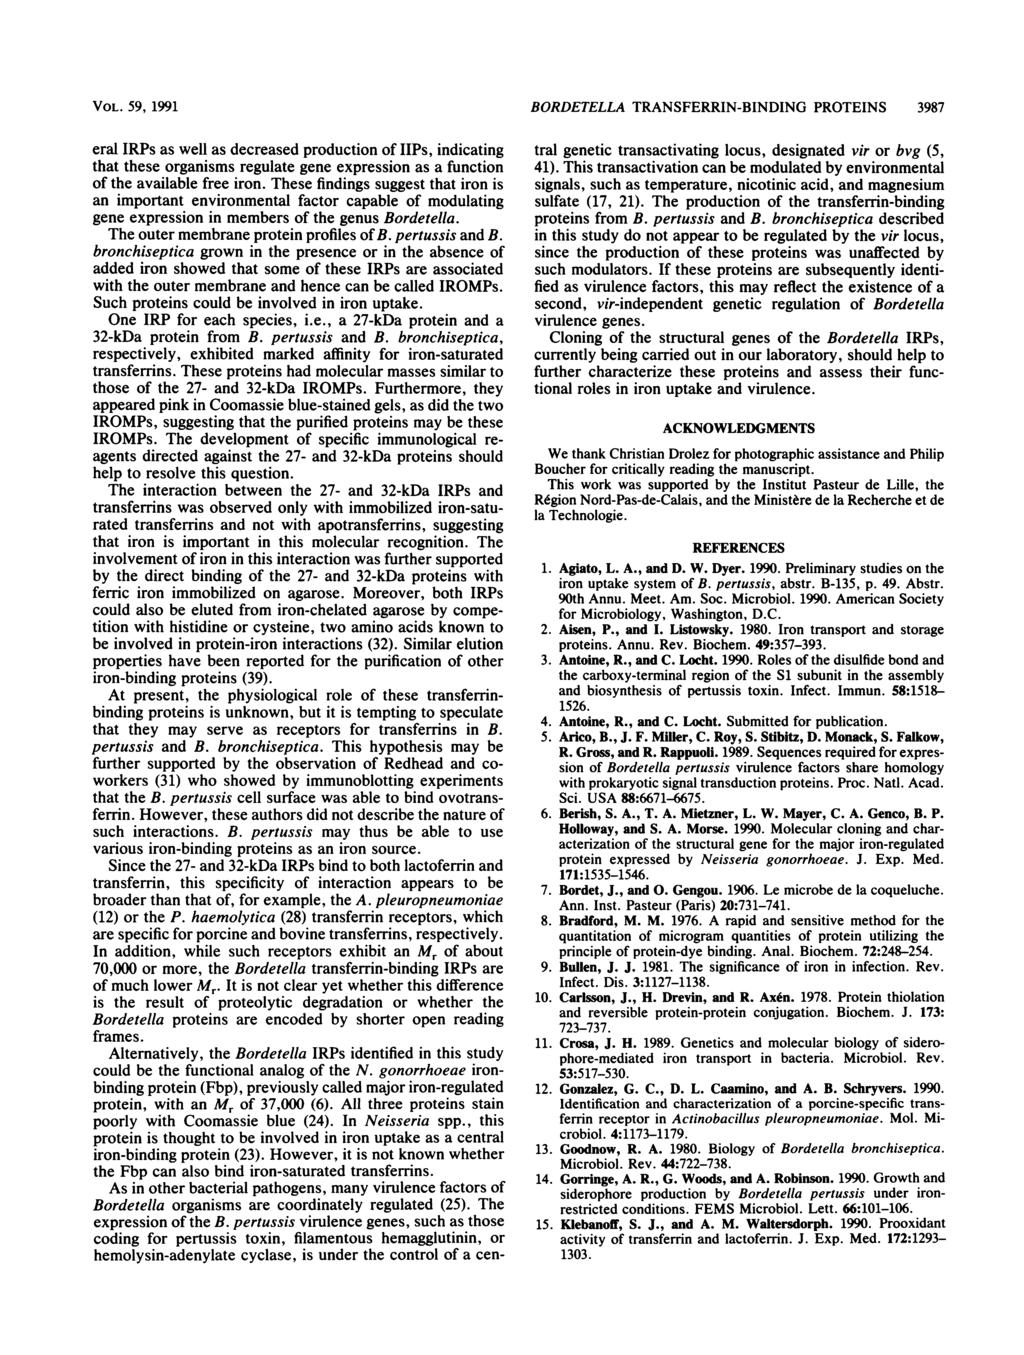 VOL. 59, 1991 eral IRPs as well as decreased production of IIPs, indicating that these organisms regulate gene expression as a function of the available free iron.